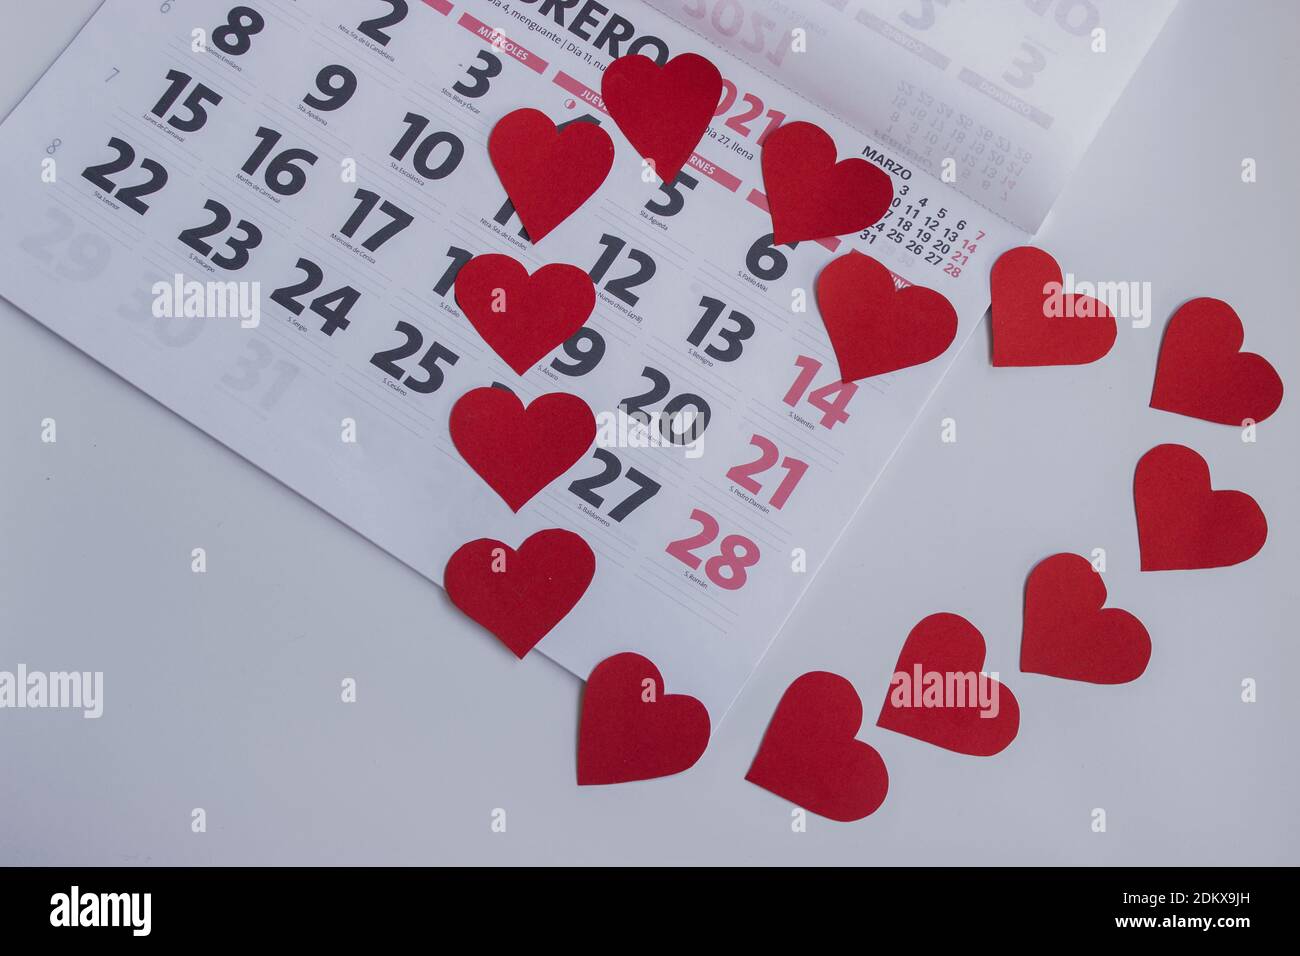 Conceptual image of 2021. Set of hearts forming a heart shape on the February 2021 calendar around Valentine's Day. 14th February marked with hearts. Stock Photo